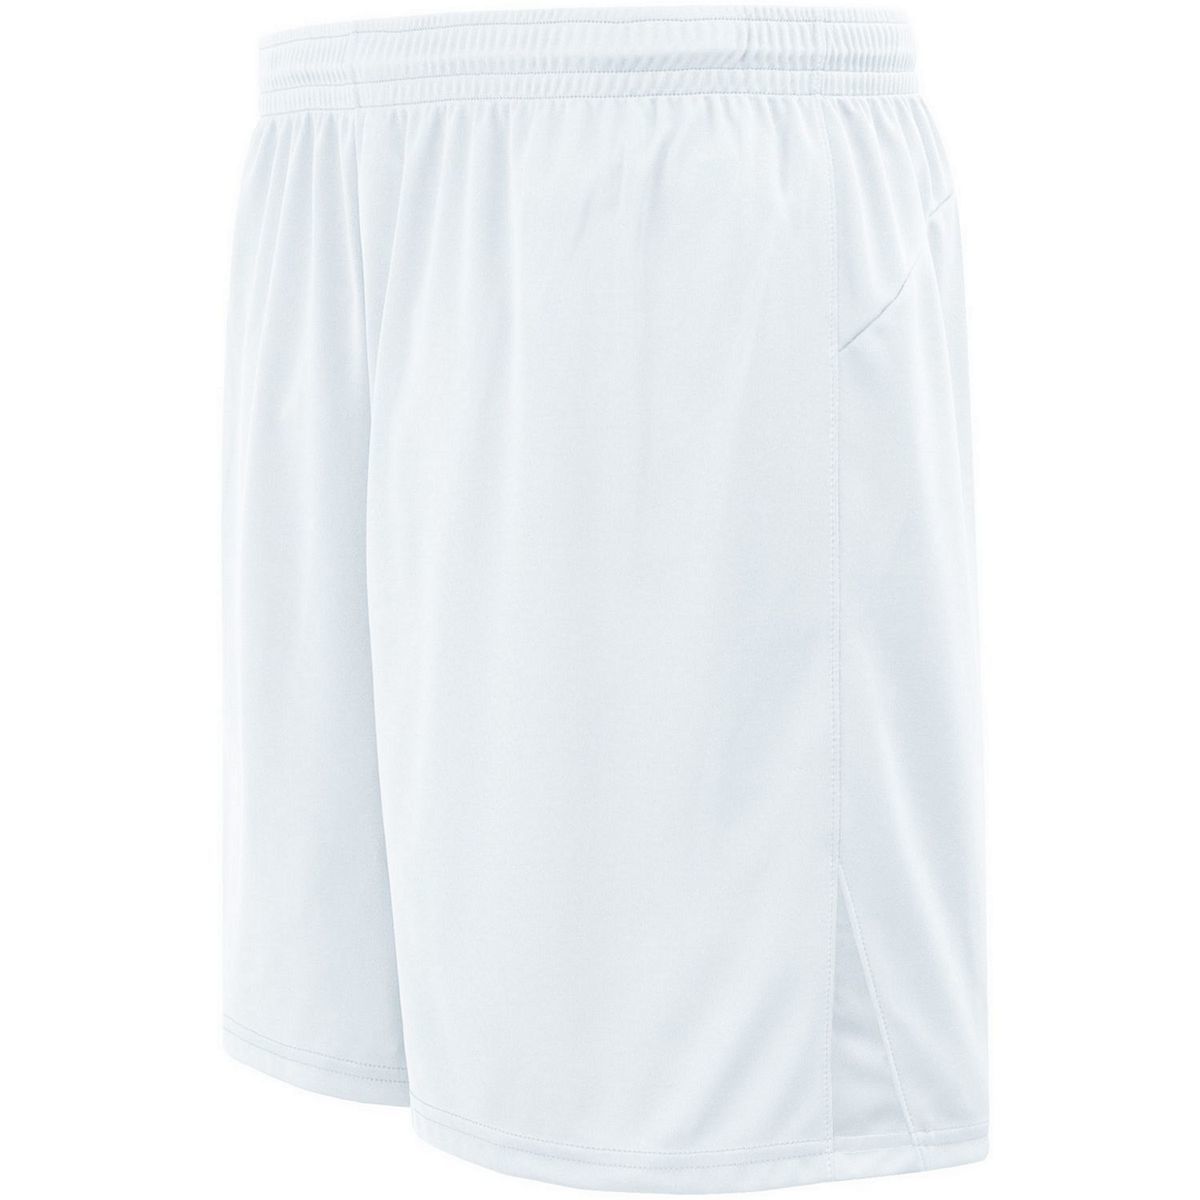 High 5 Ladies Hawk Shorts in White/White  -Part of the Ladies, Ladies-Shorts, High5-Products, Soccer, All-Sports-1 product lines at KanaleyCreations.com